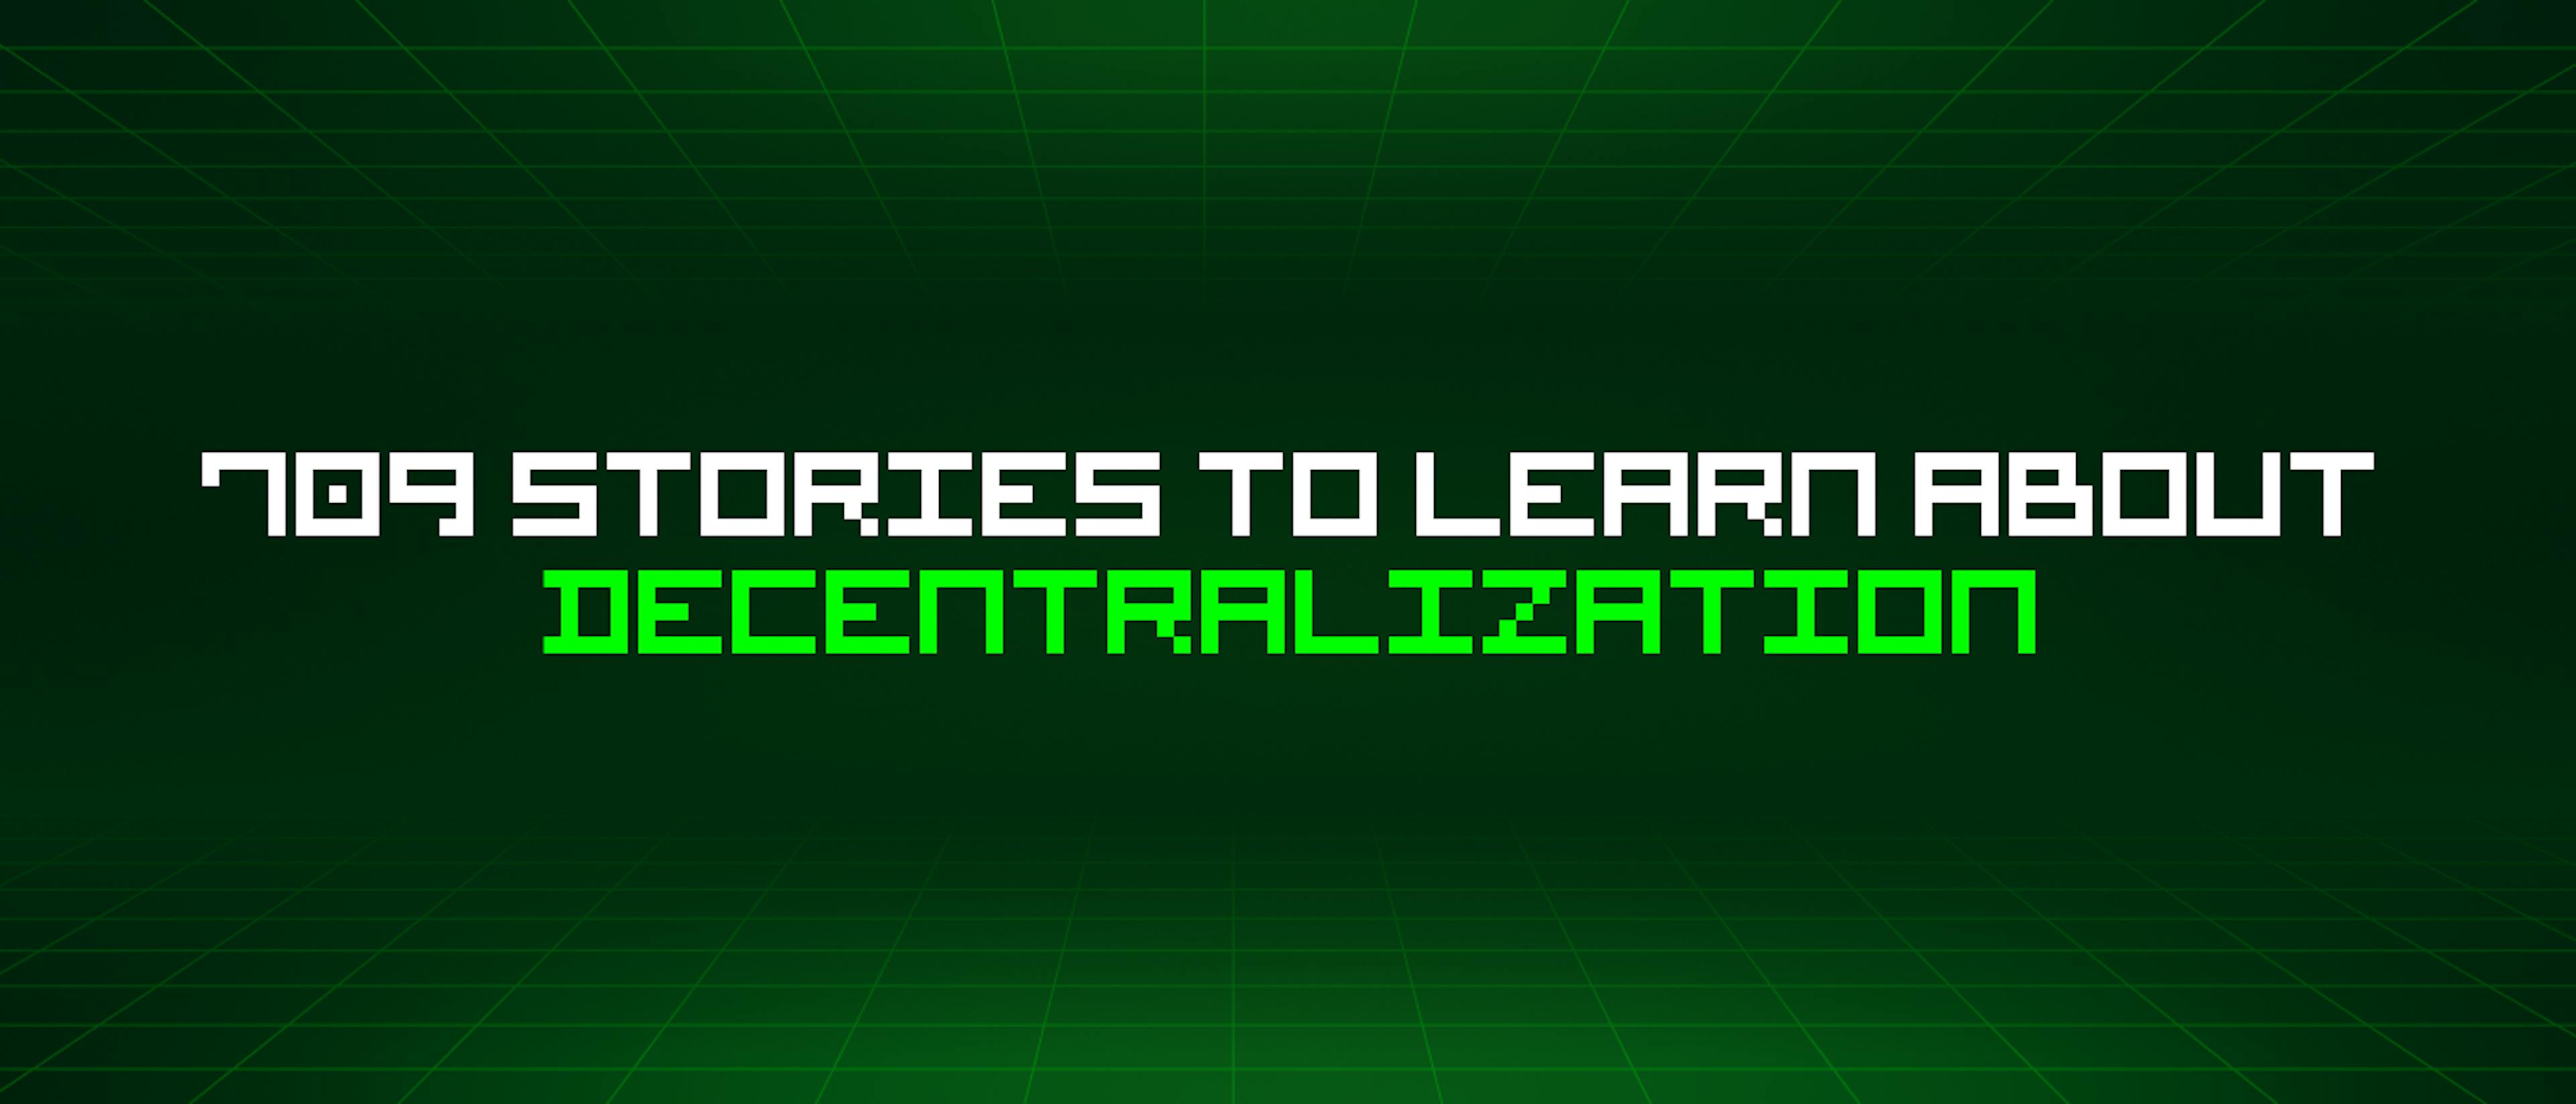 featured image - 709 Stories To Learn About Decentralization